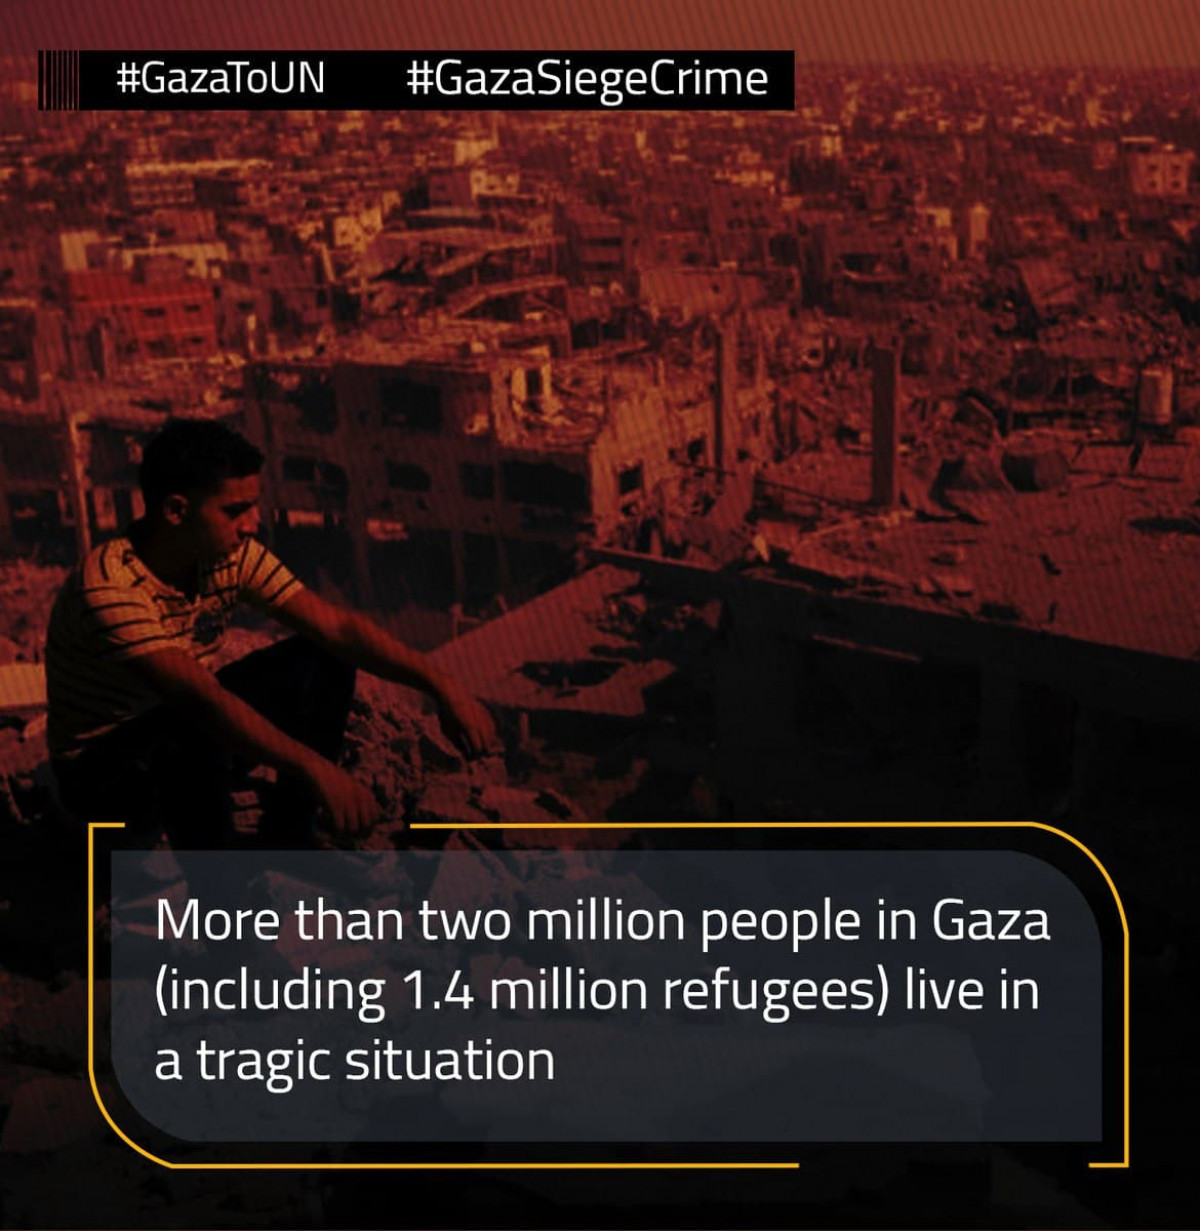 The population of the #Gaza